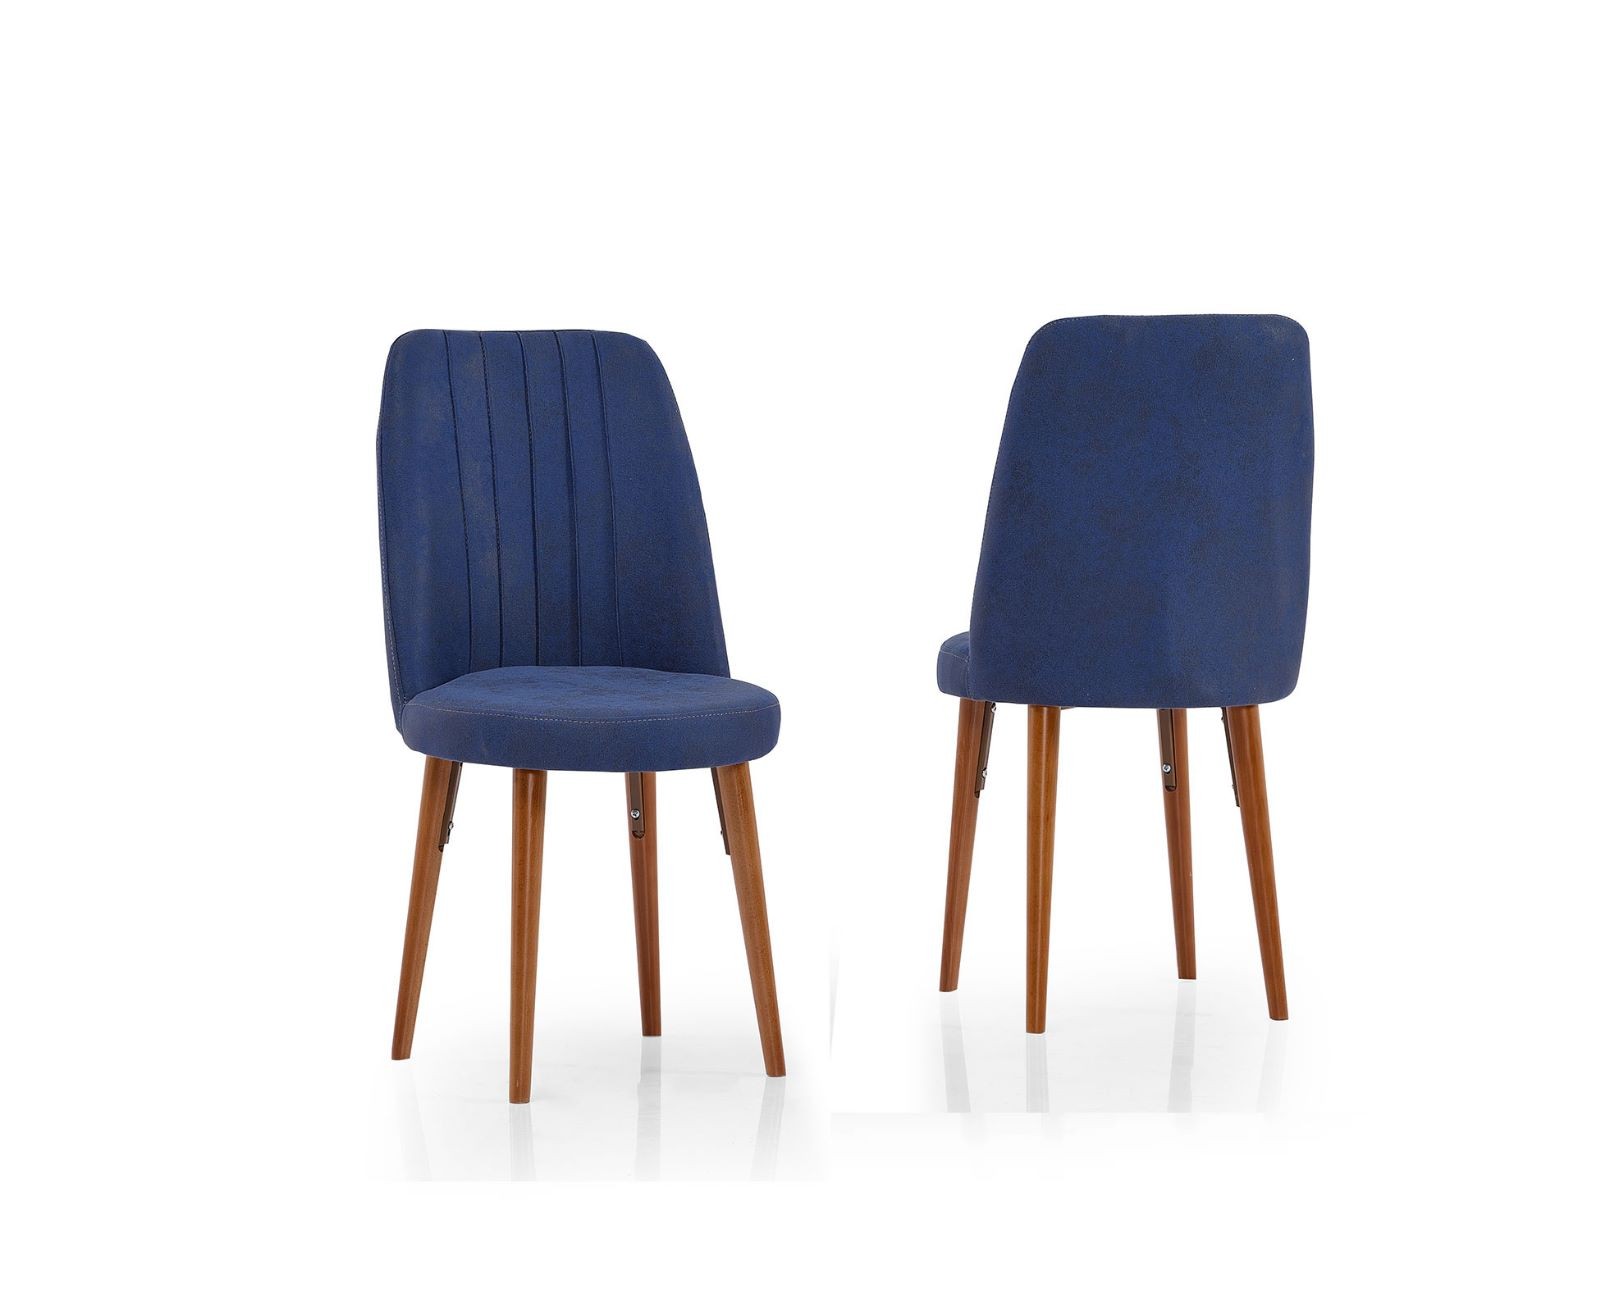 Olesivo Oval Gold Chair - Navy Blue